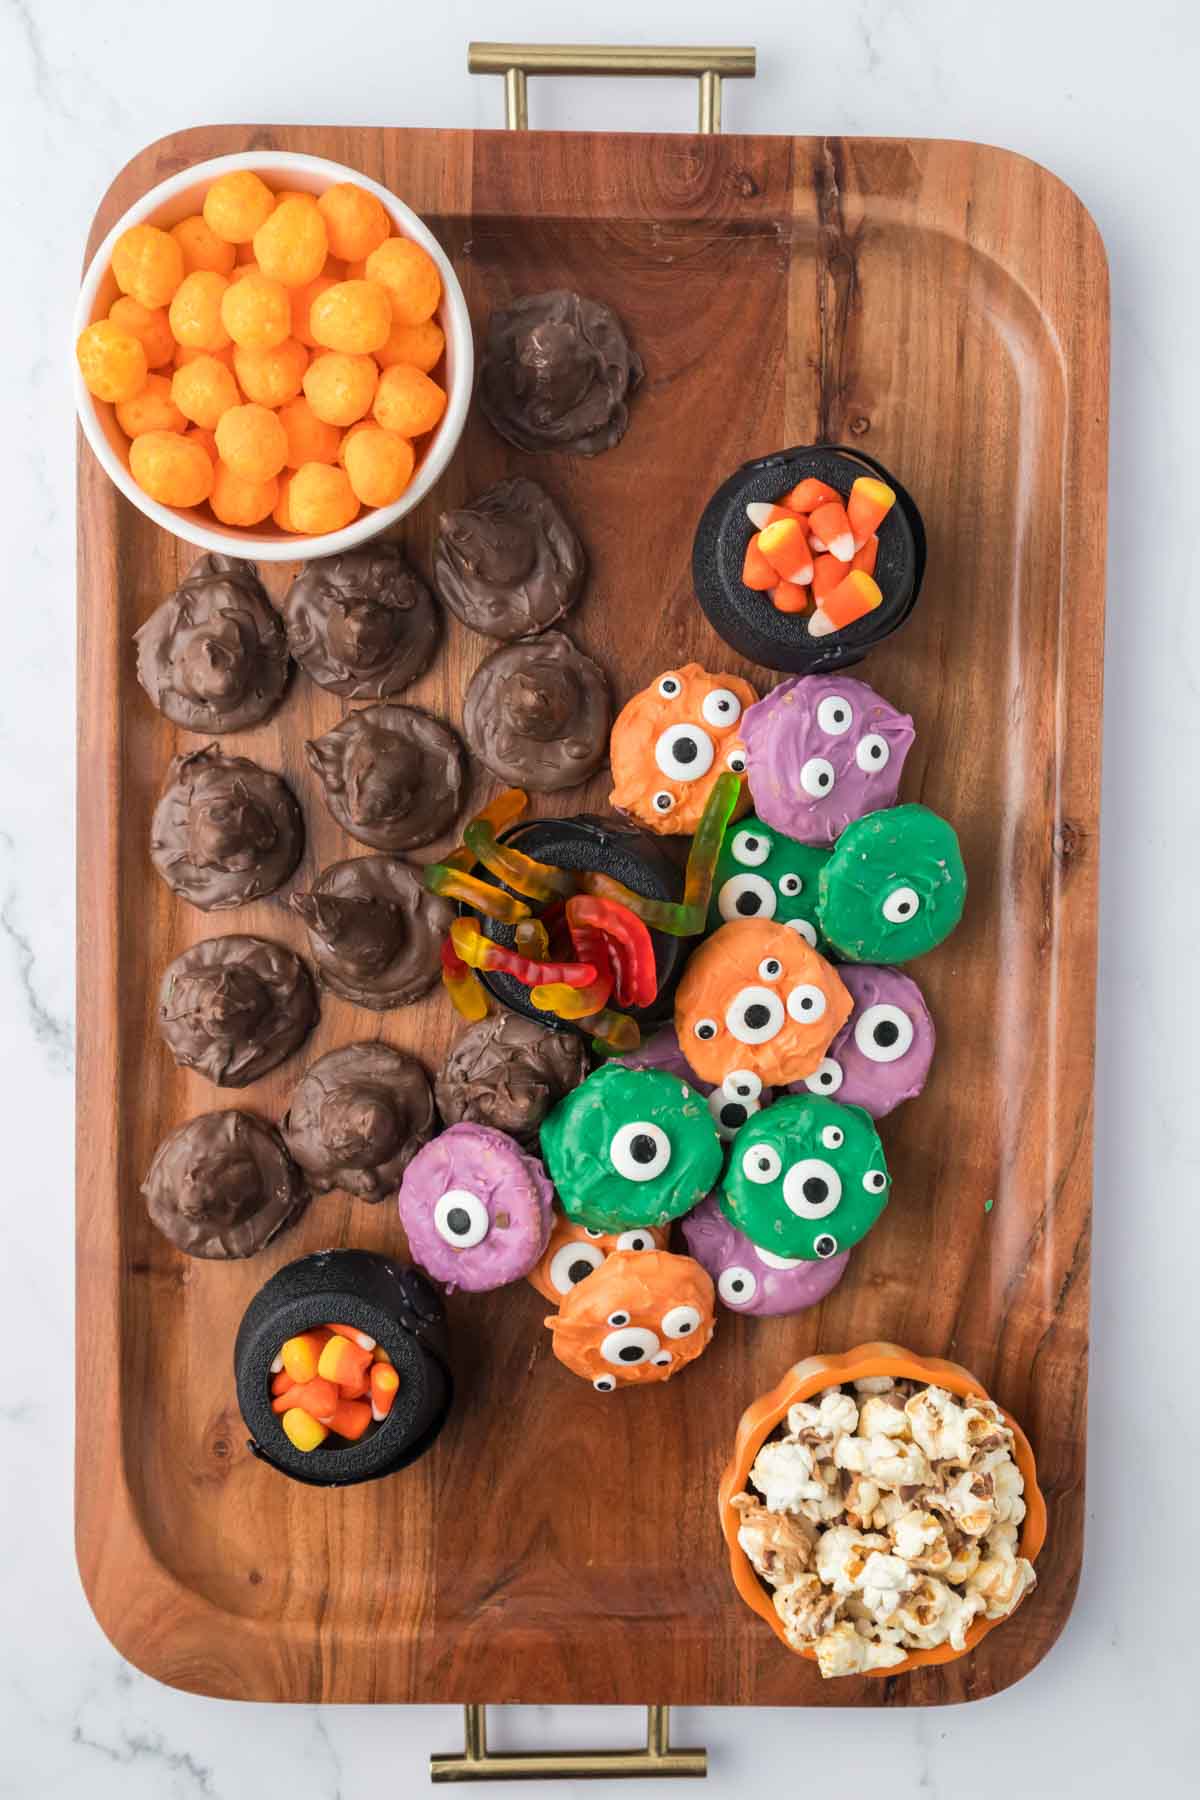 Halloween snack board with chocolate hats and monster cookies